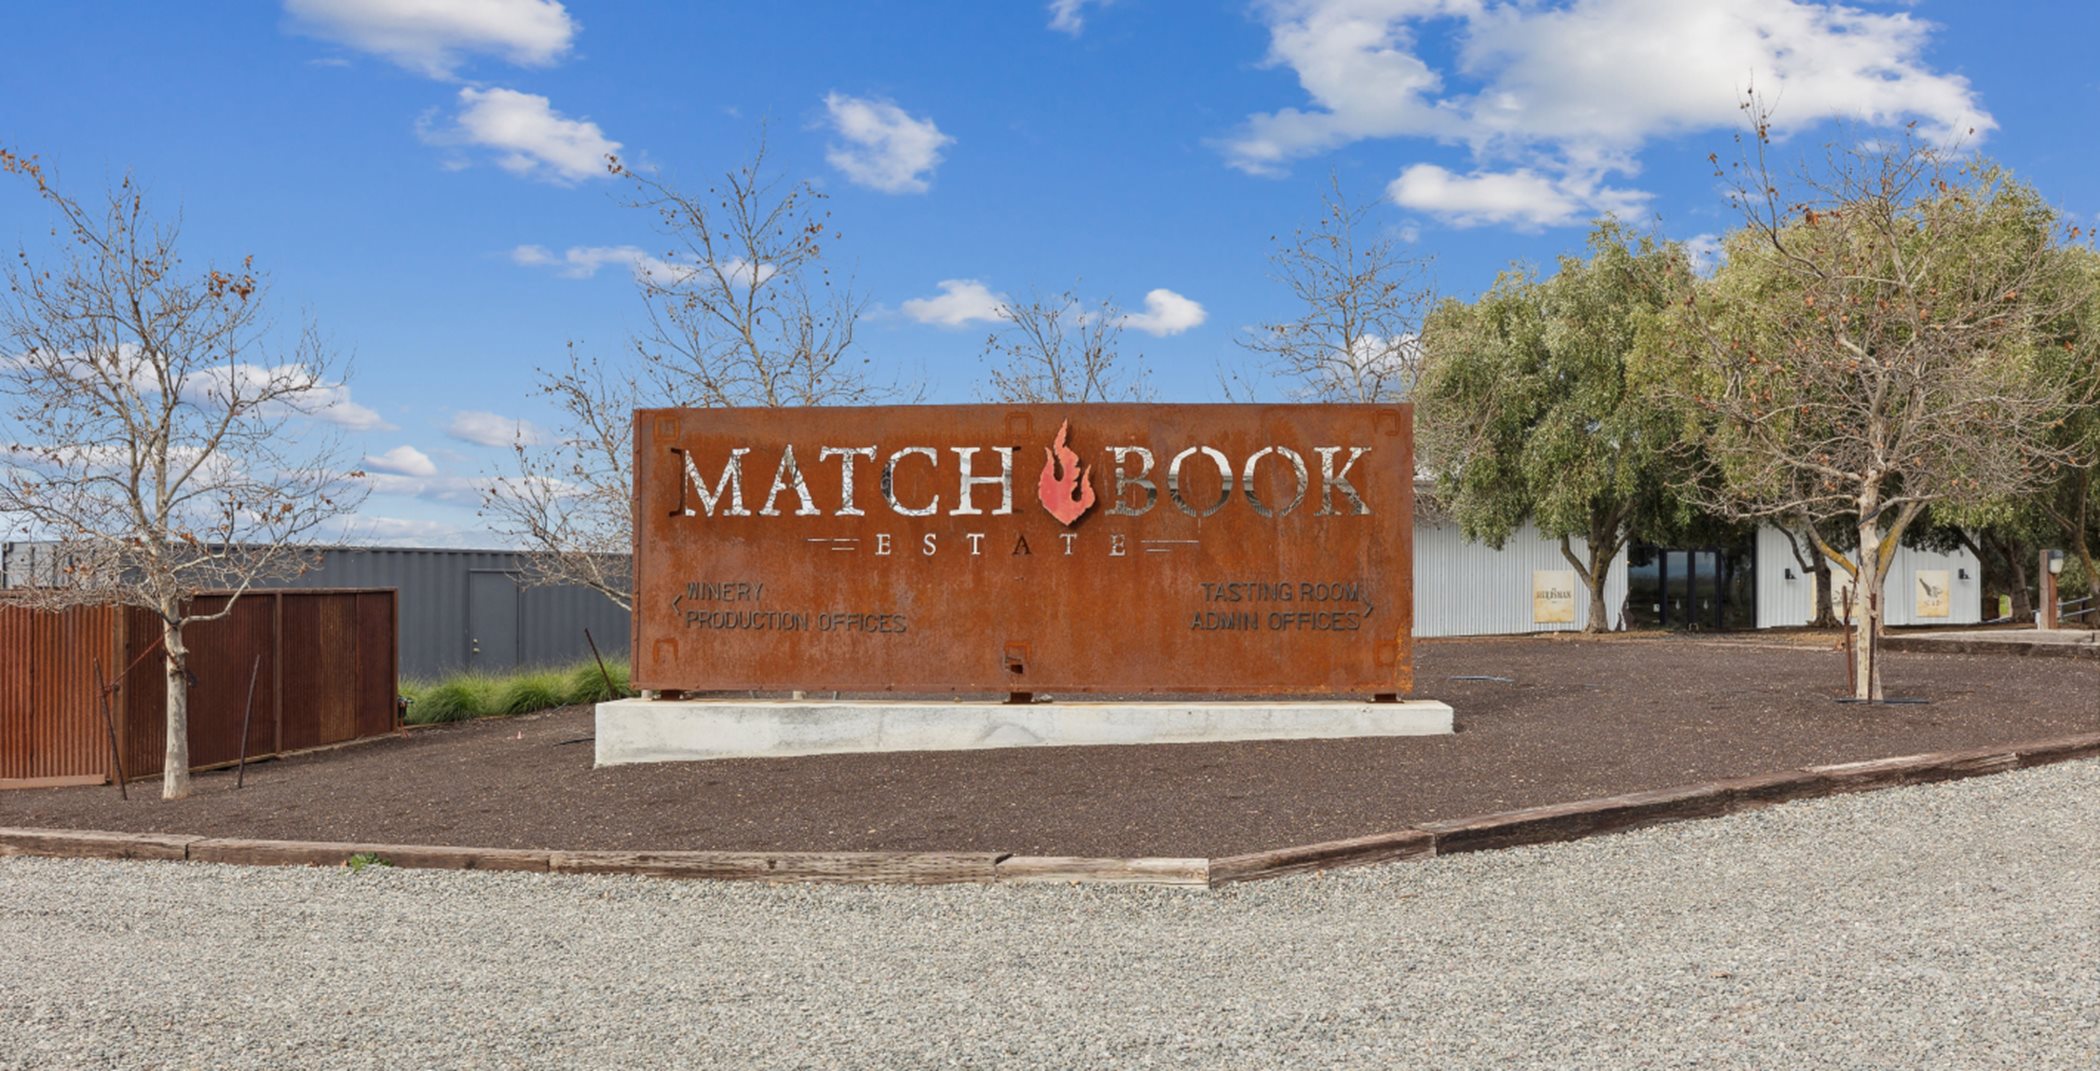 Matchbook Wine Company monument sign